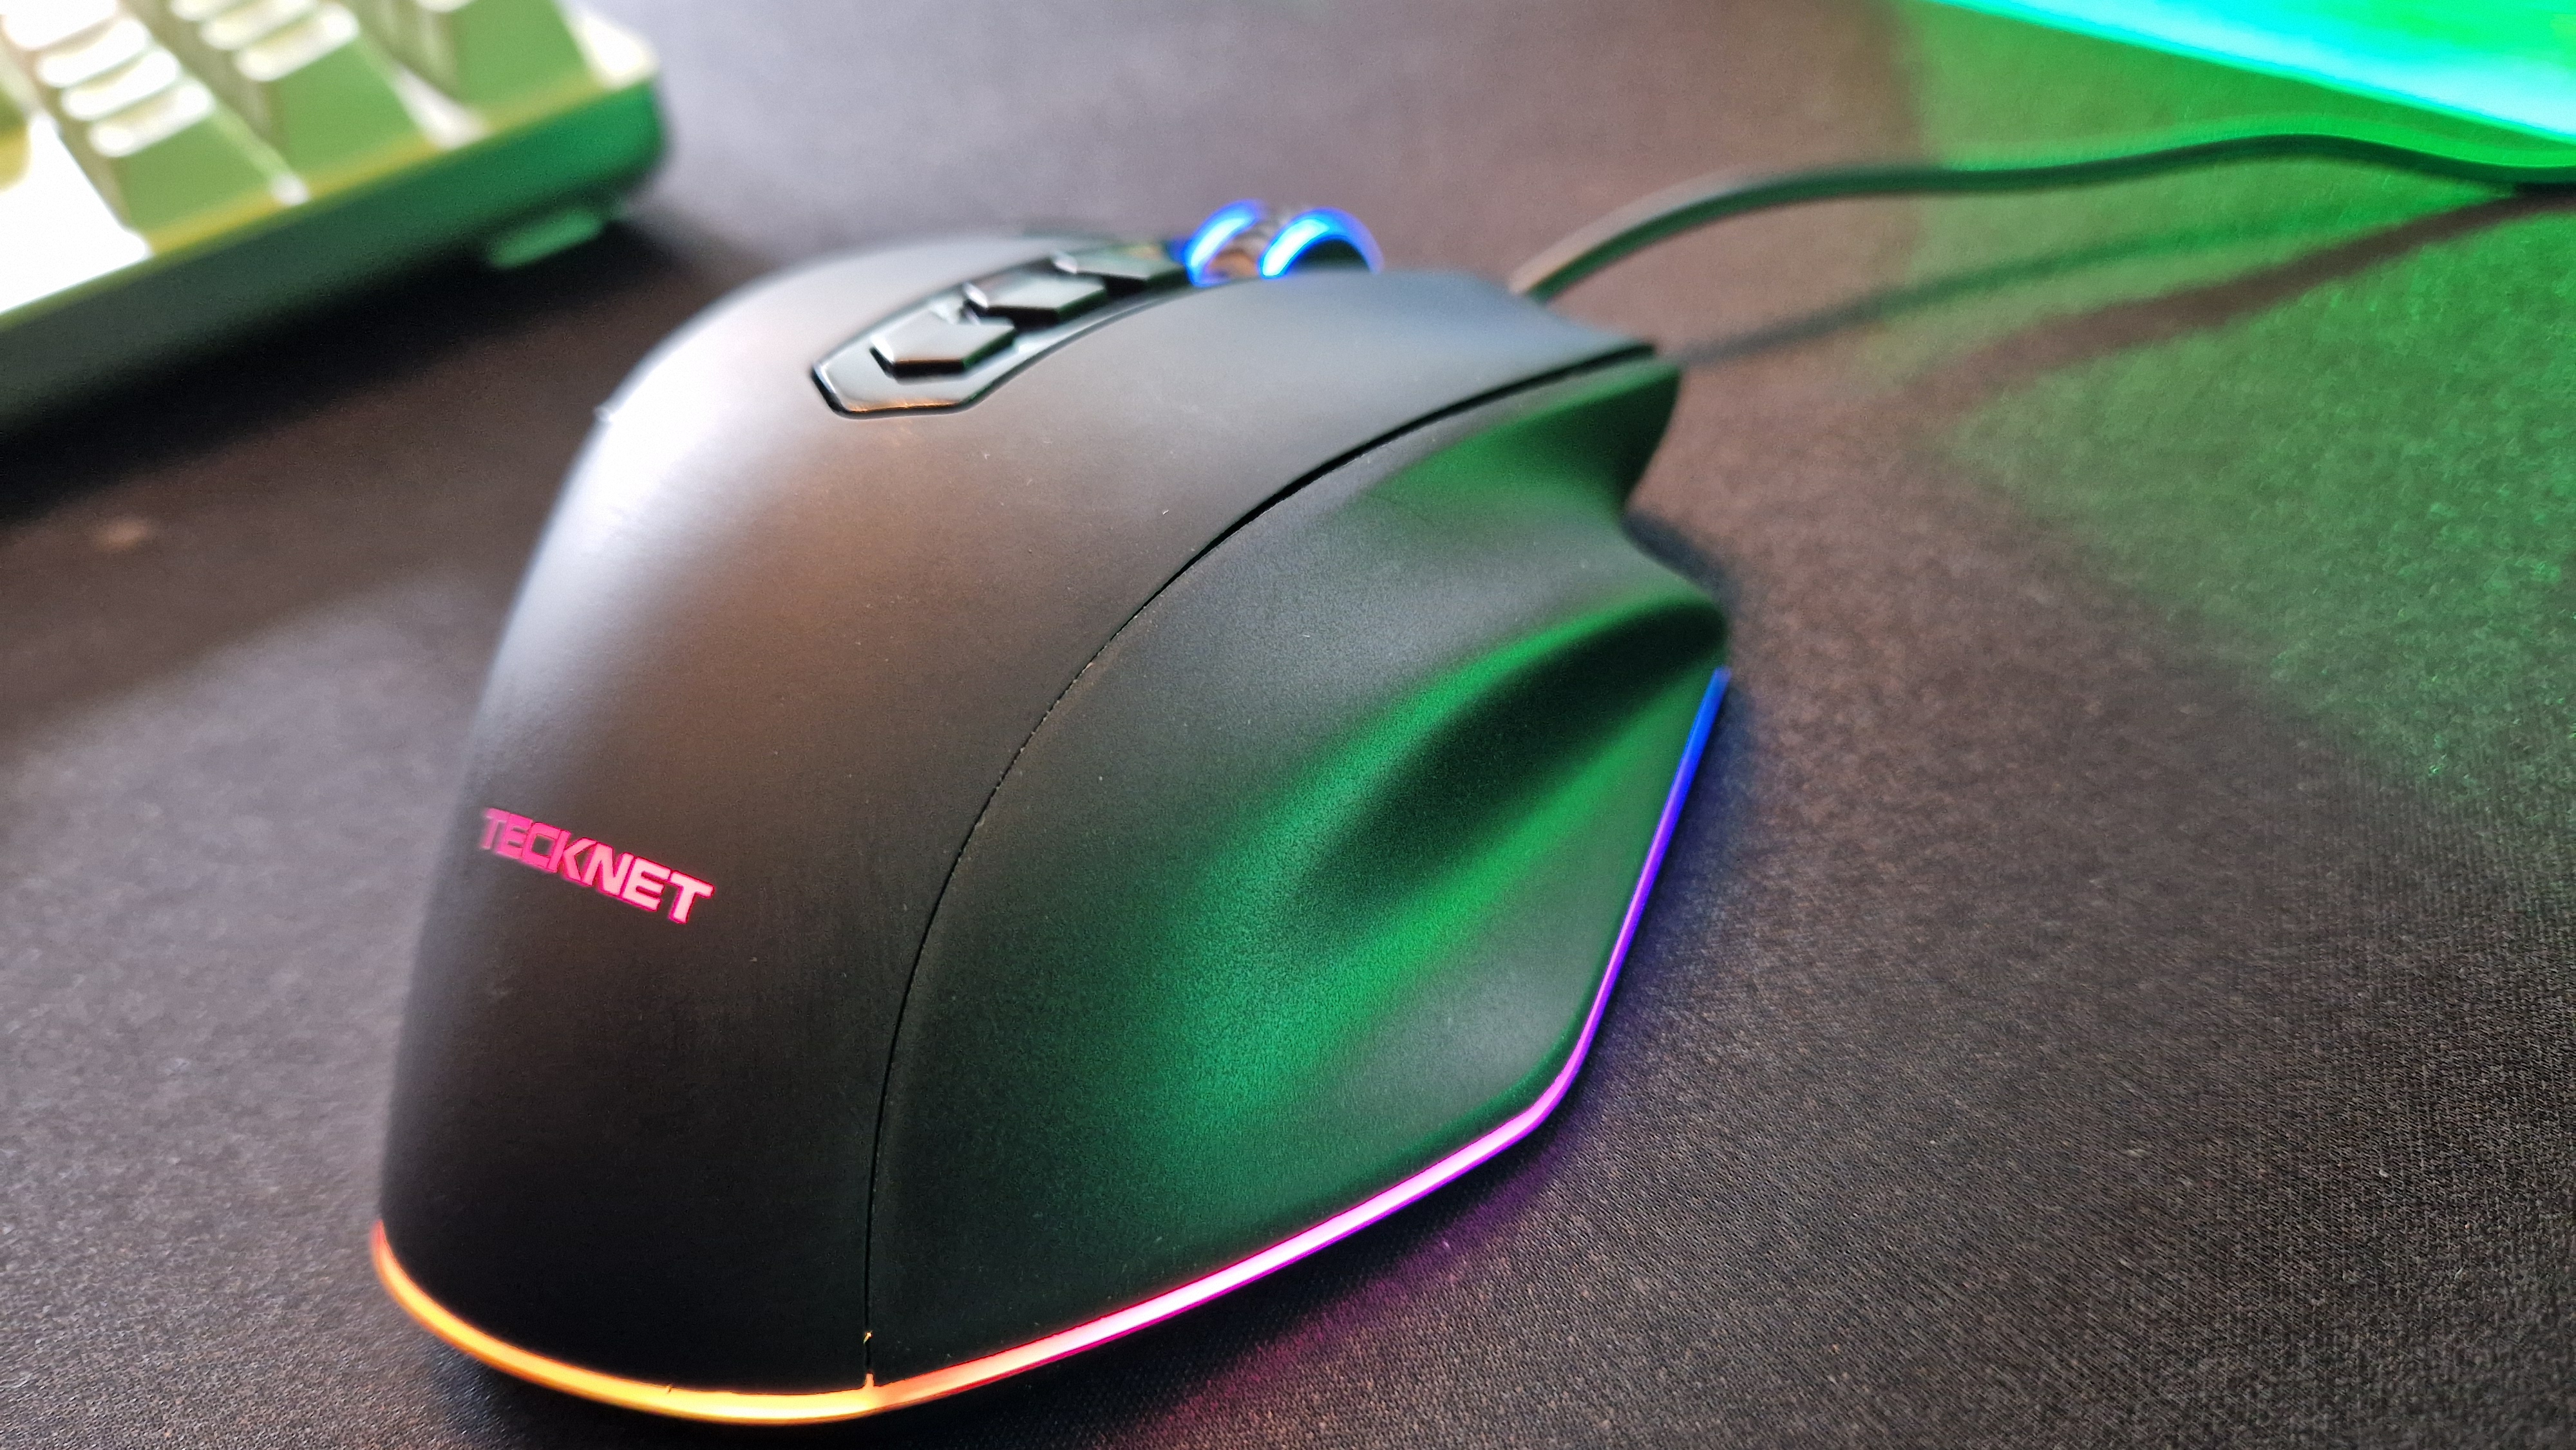 Tecknet Wired Gaming Mouse's pinky support